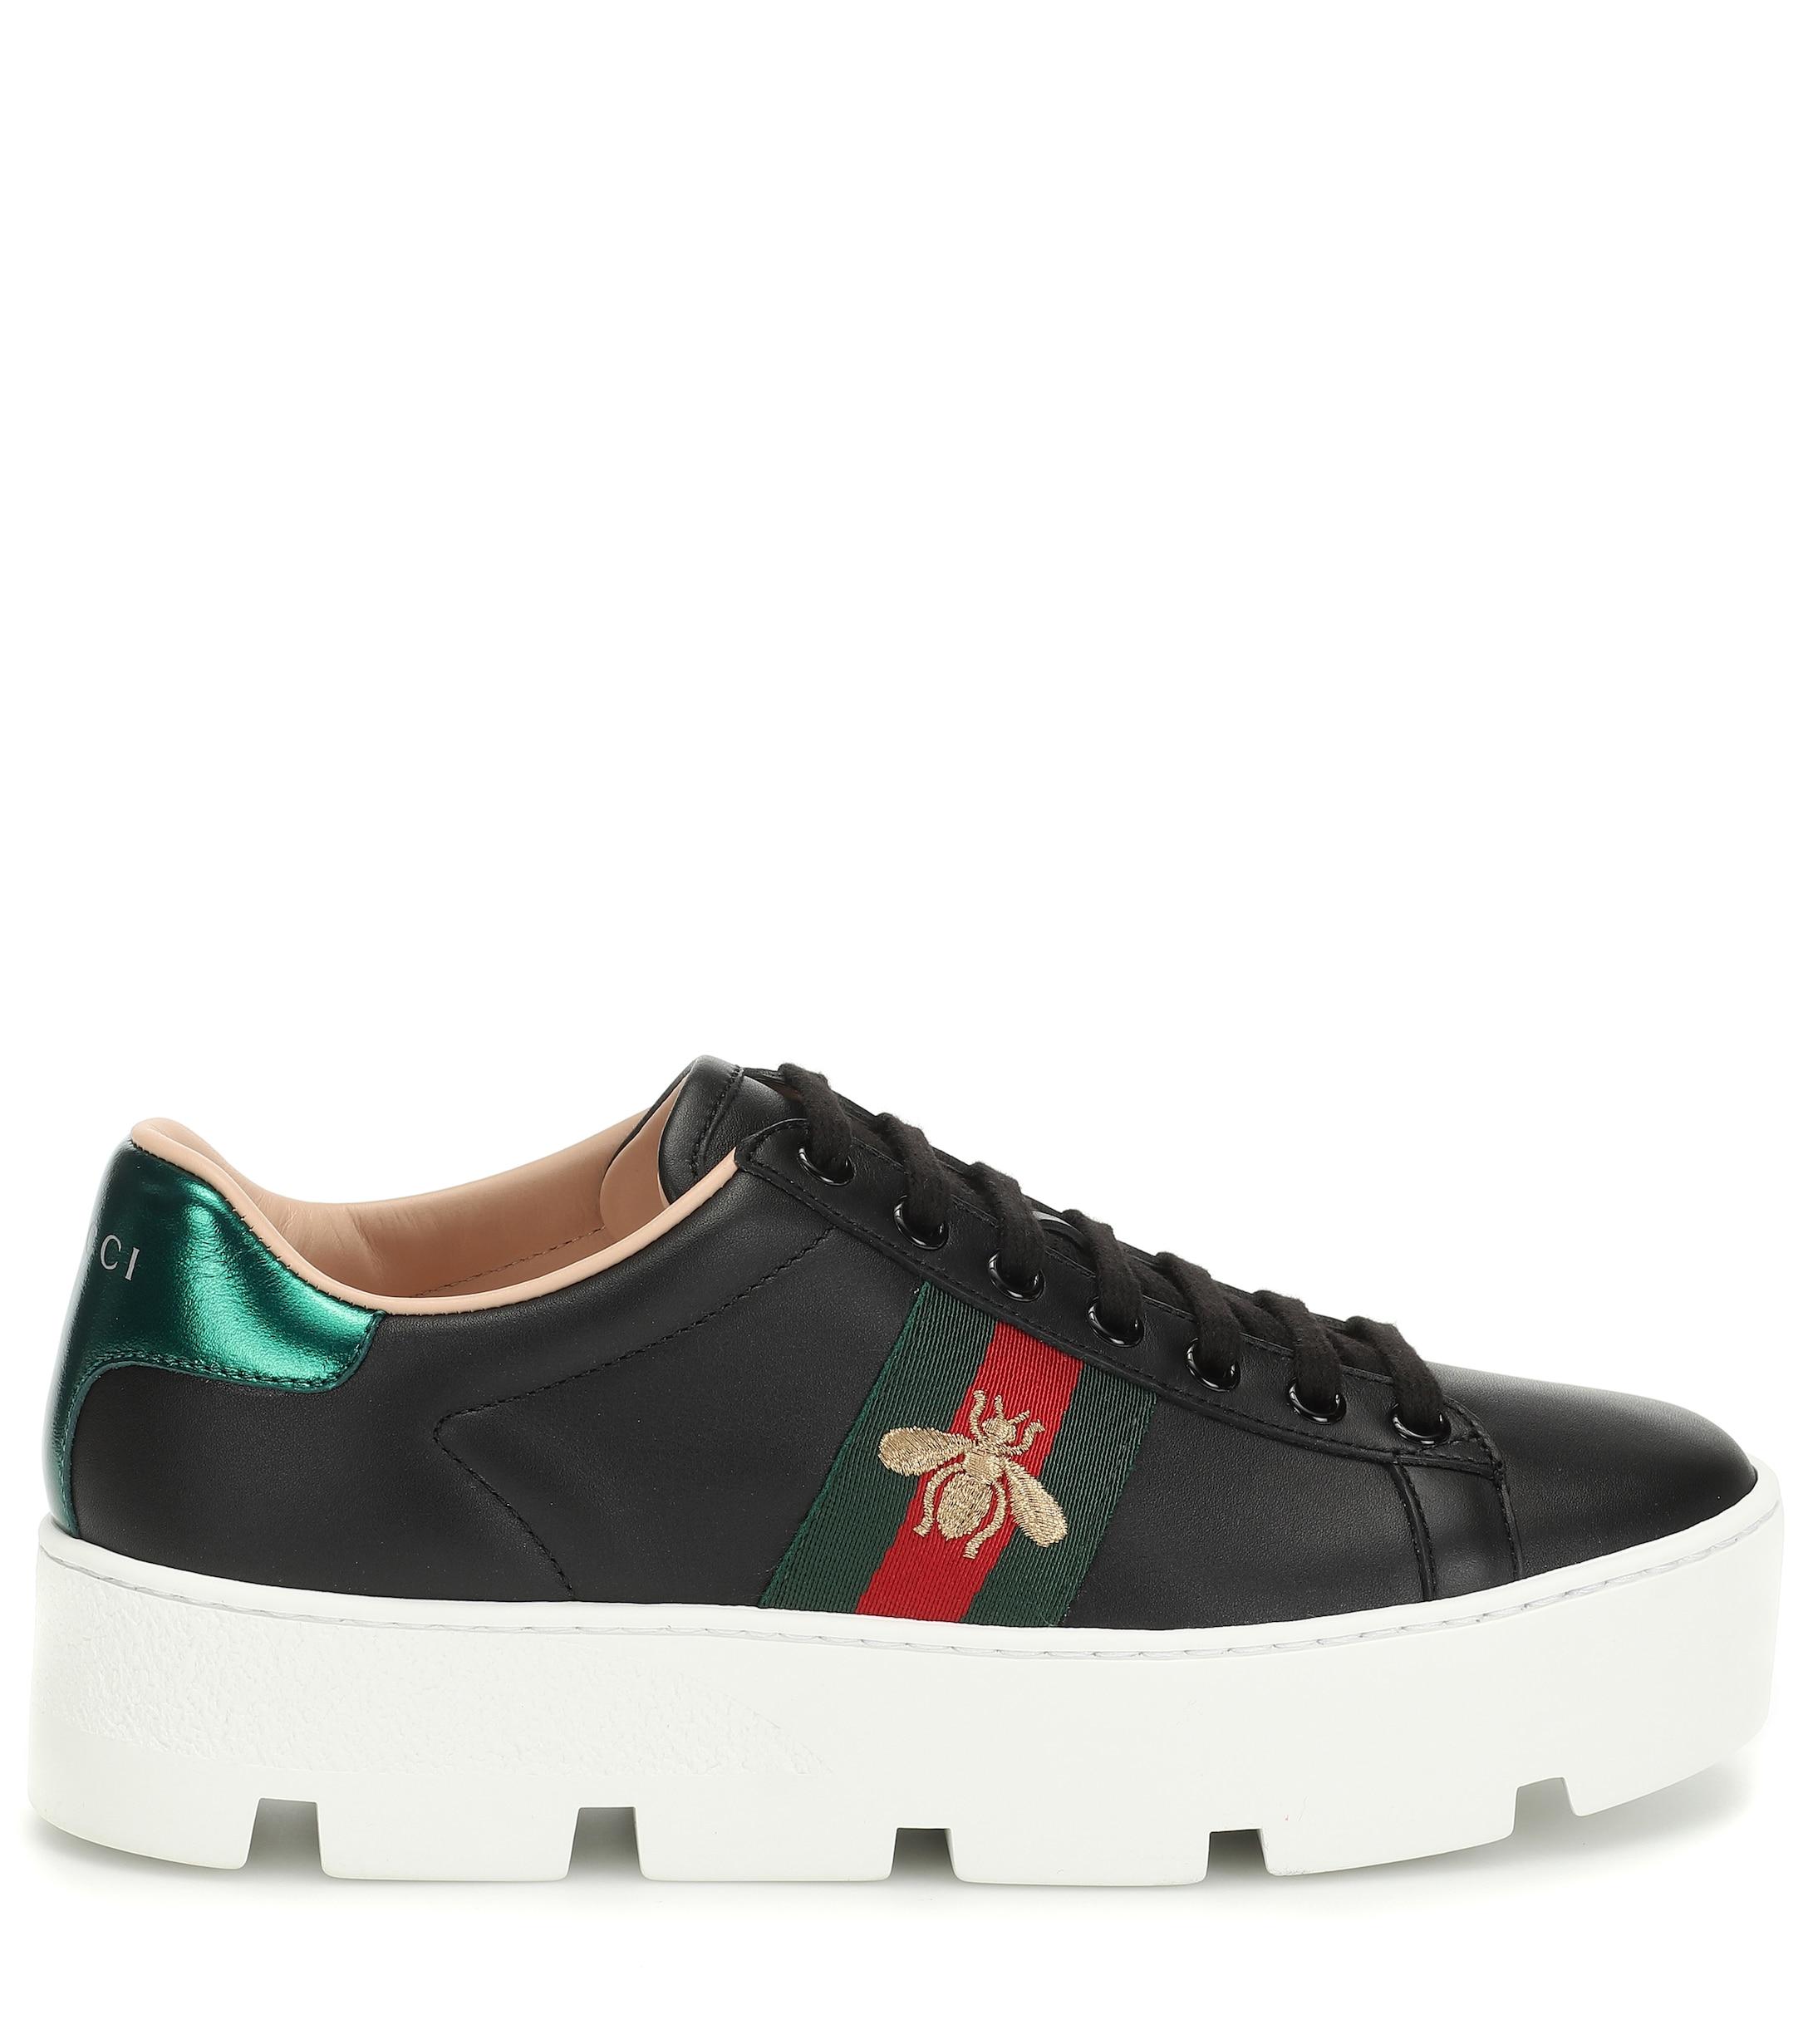 Gucci Ace Leather Platform Sneakers - Save 6% - Lyst